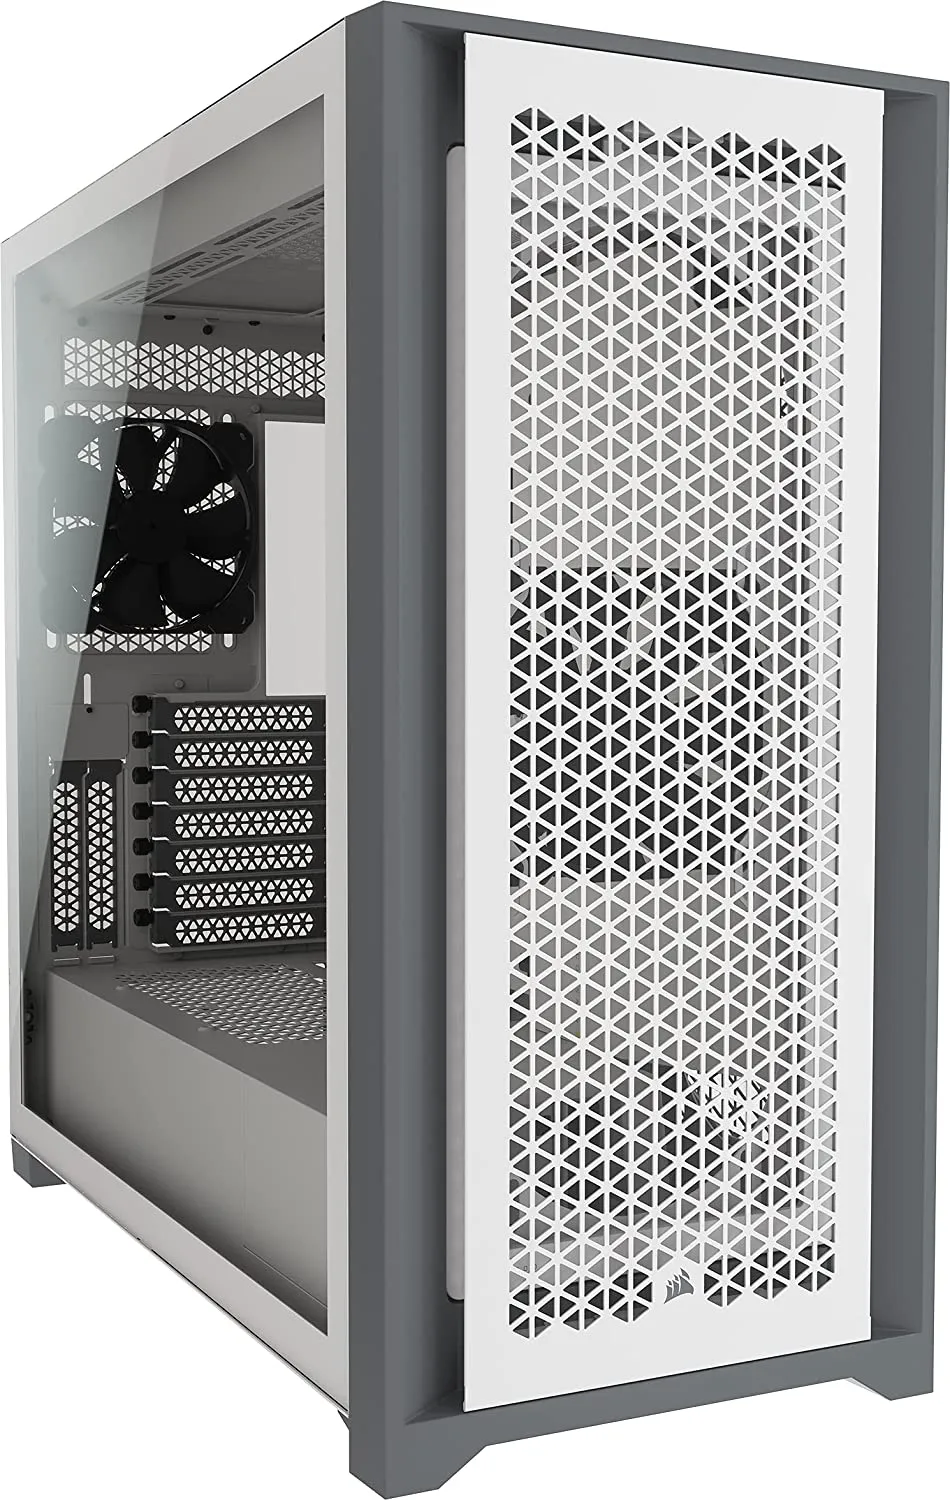 CORSAIR 500D RGB SE ATX Mid Tower Cabinet With Tempered Glass Side Panel And RGB Lighting And Fan Controller